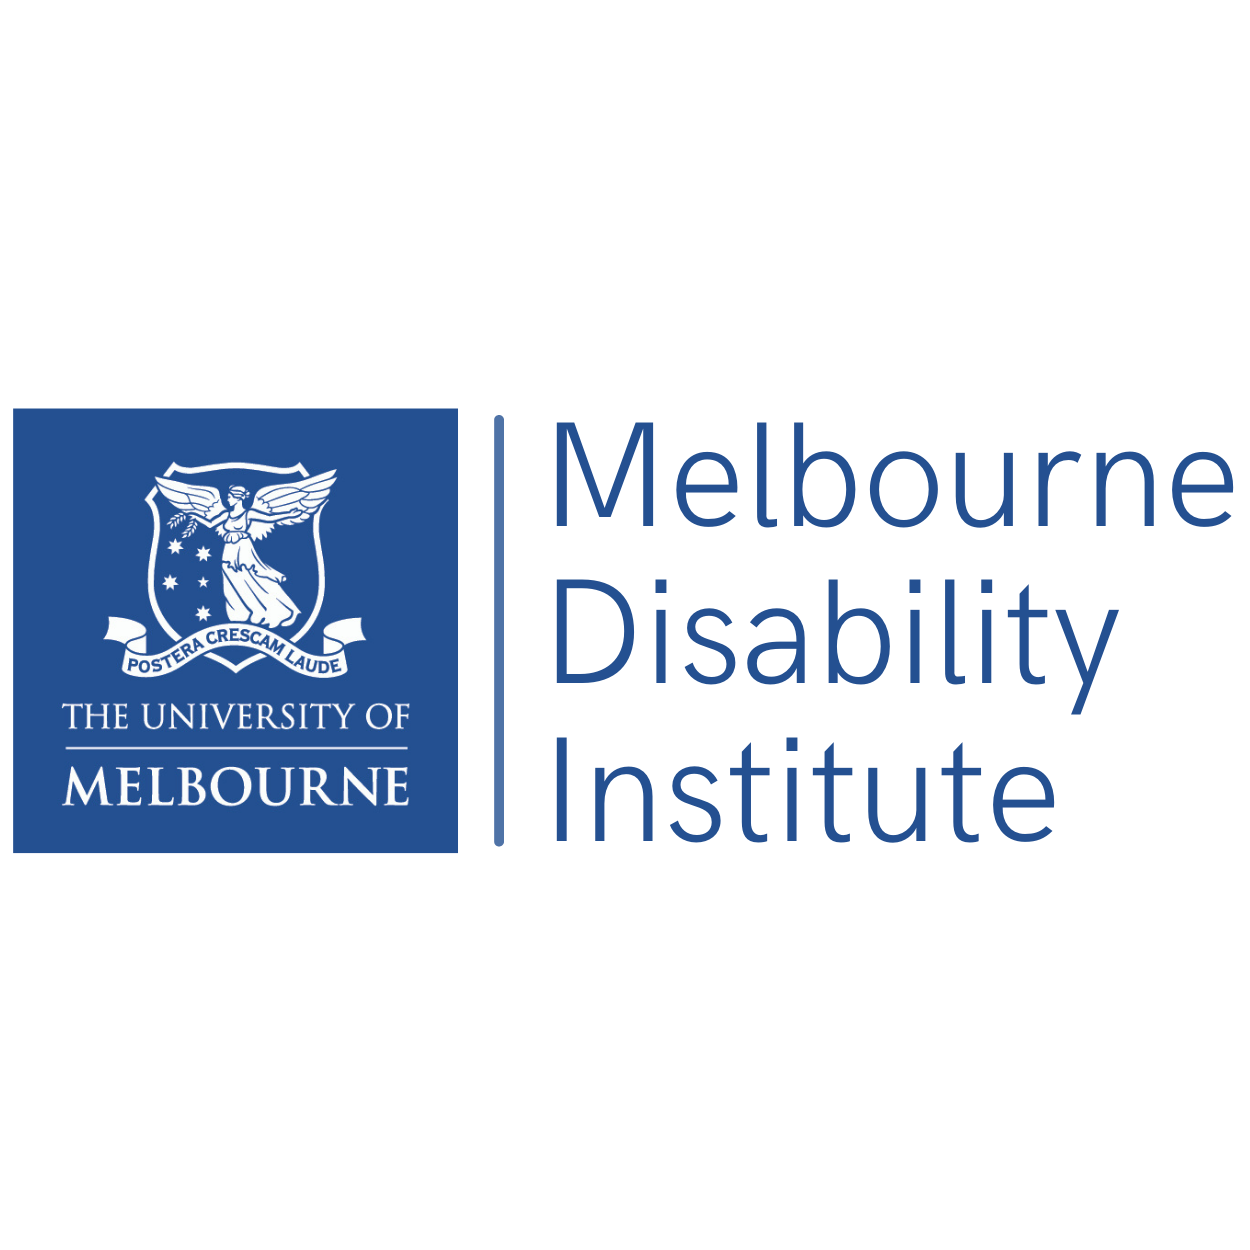 The University of Melbourne; Melbourne Disability Institute logo.